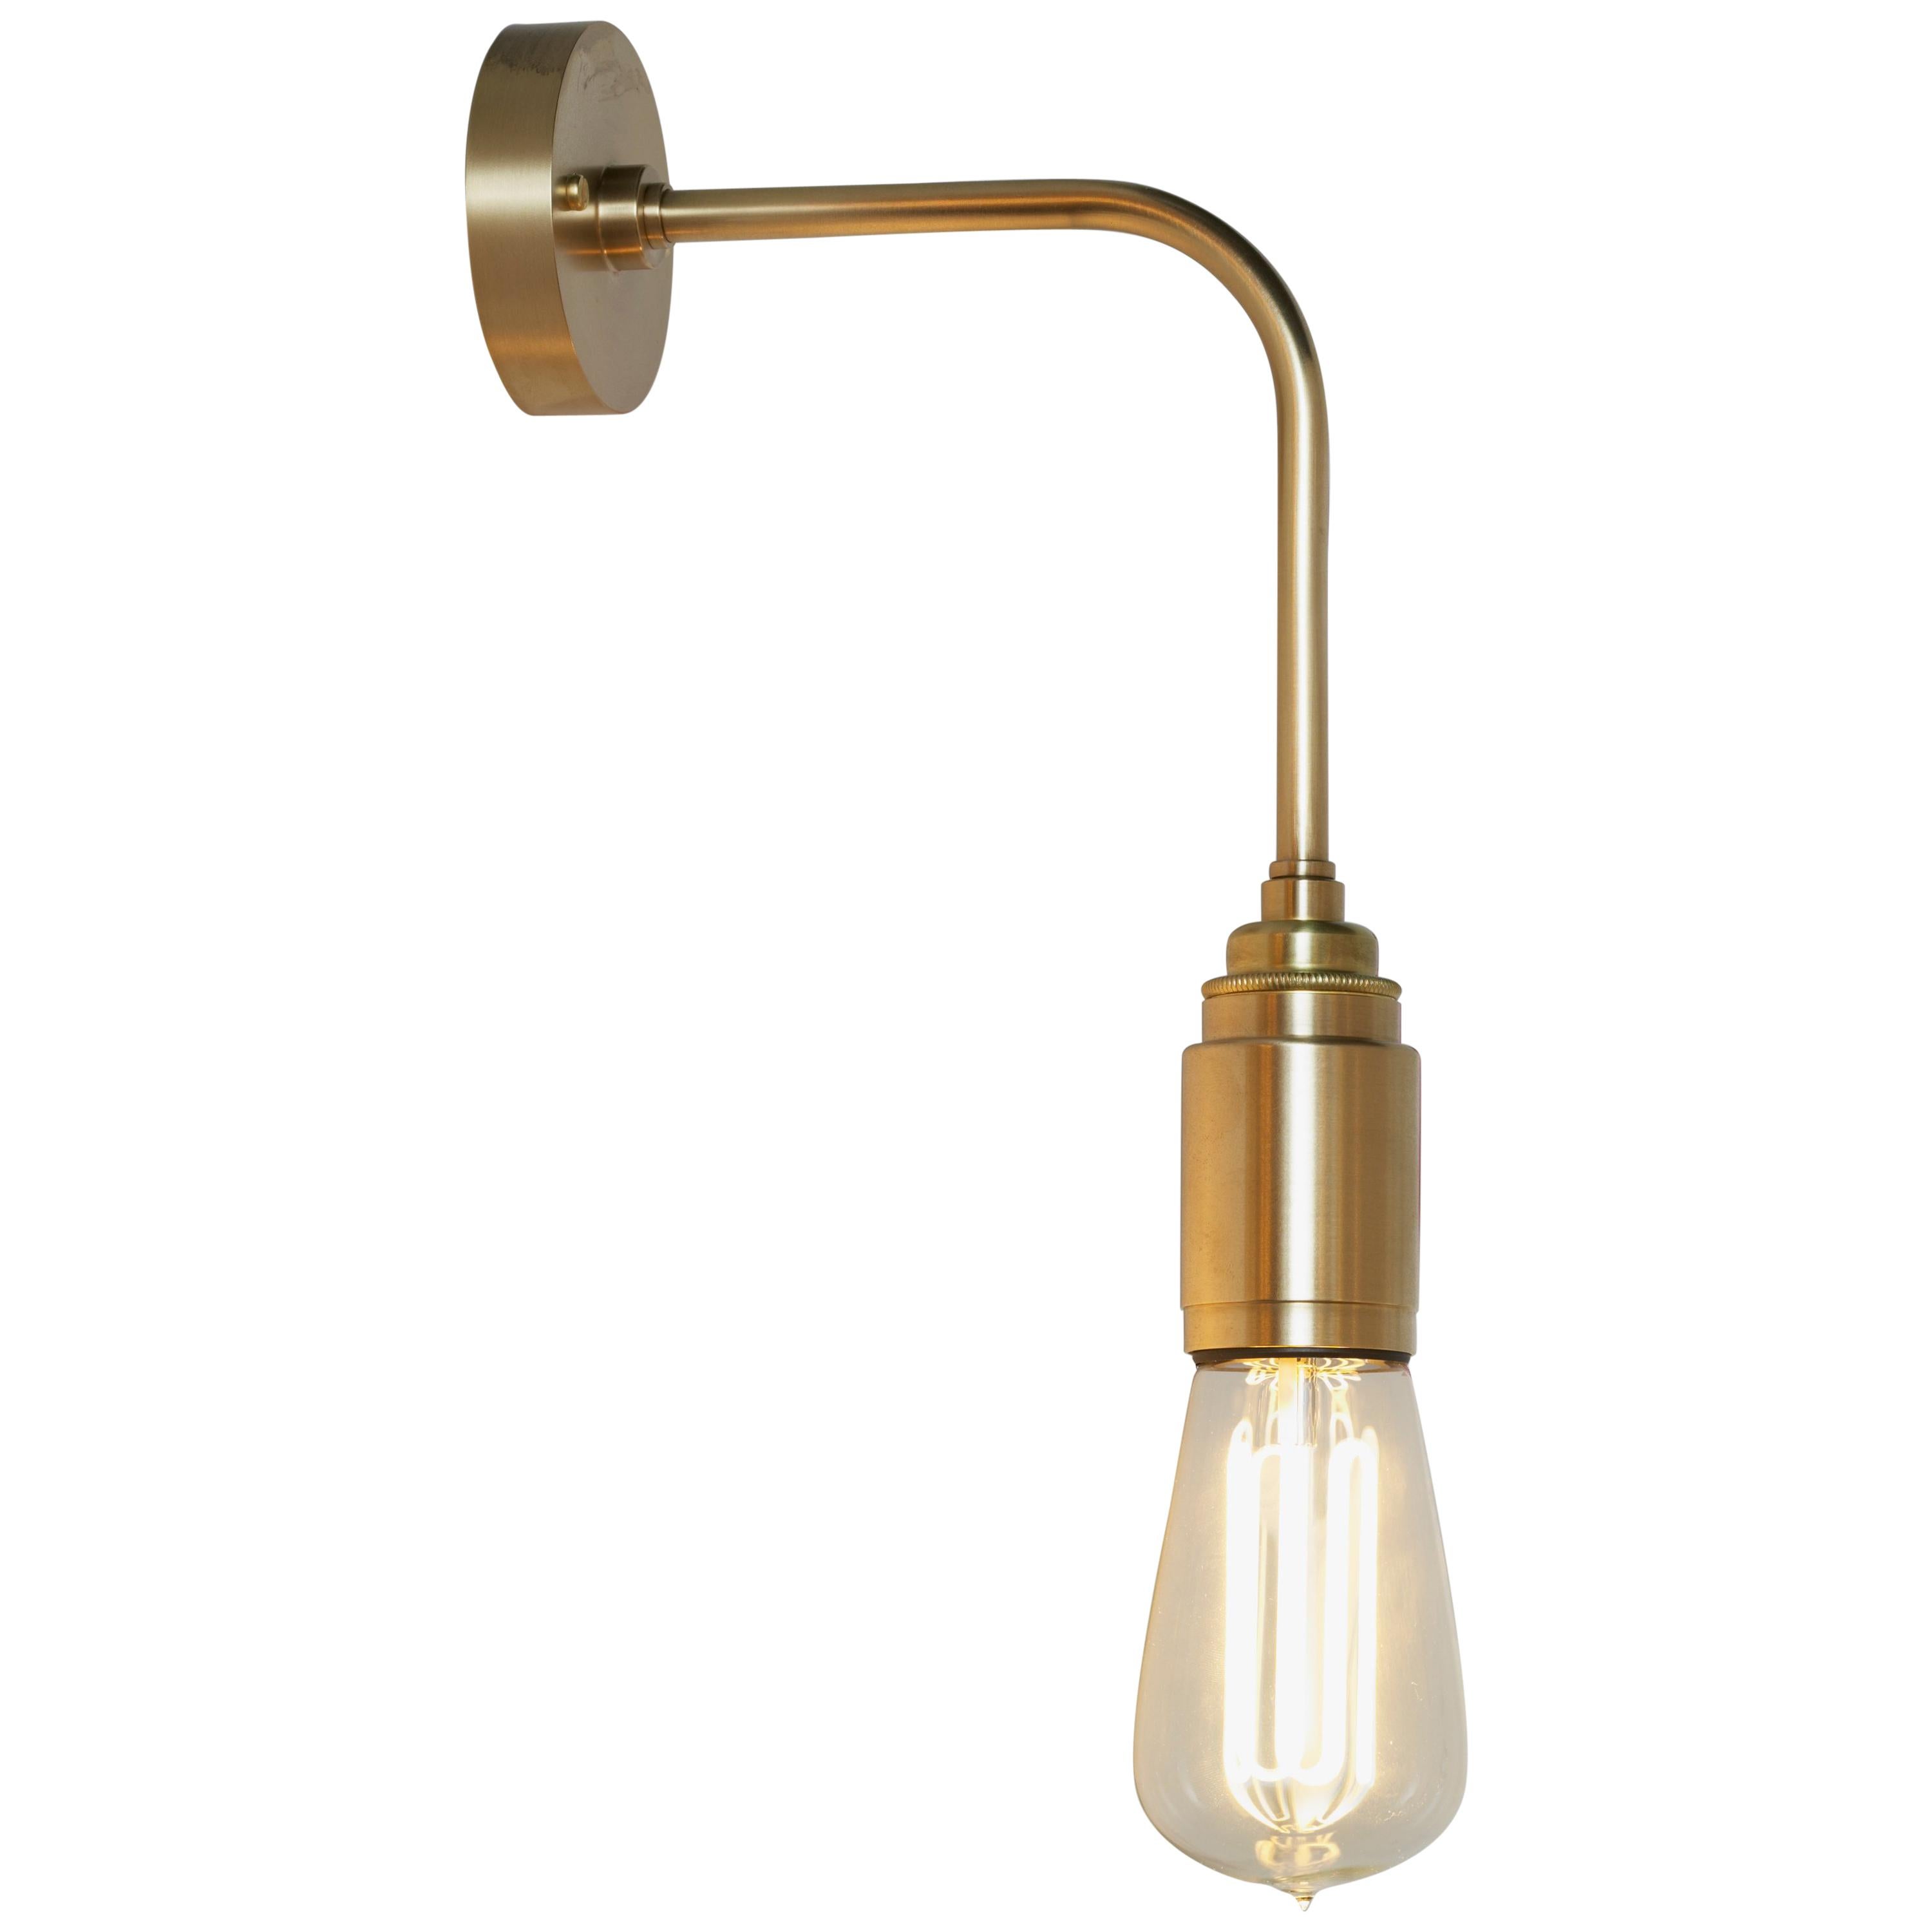 Tekna Looe-C Wall Light with Sateen Brass Finish For Sale